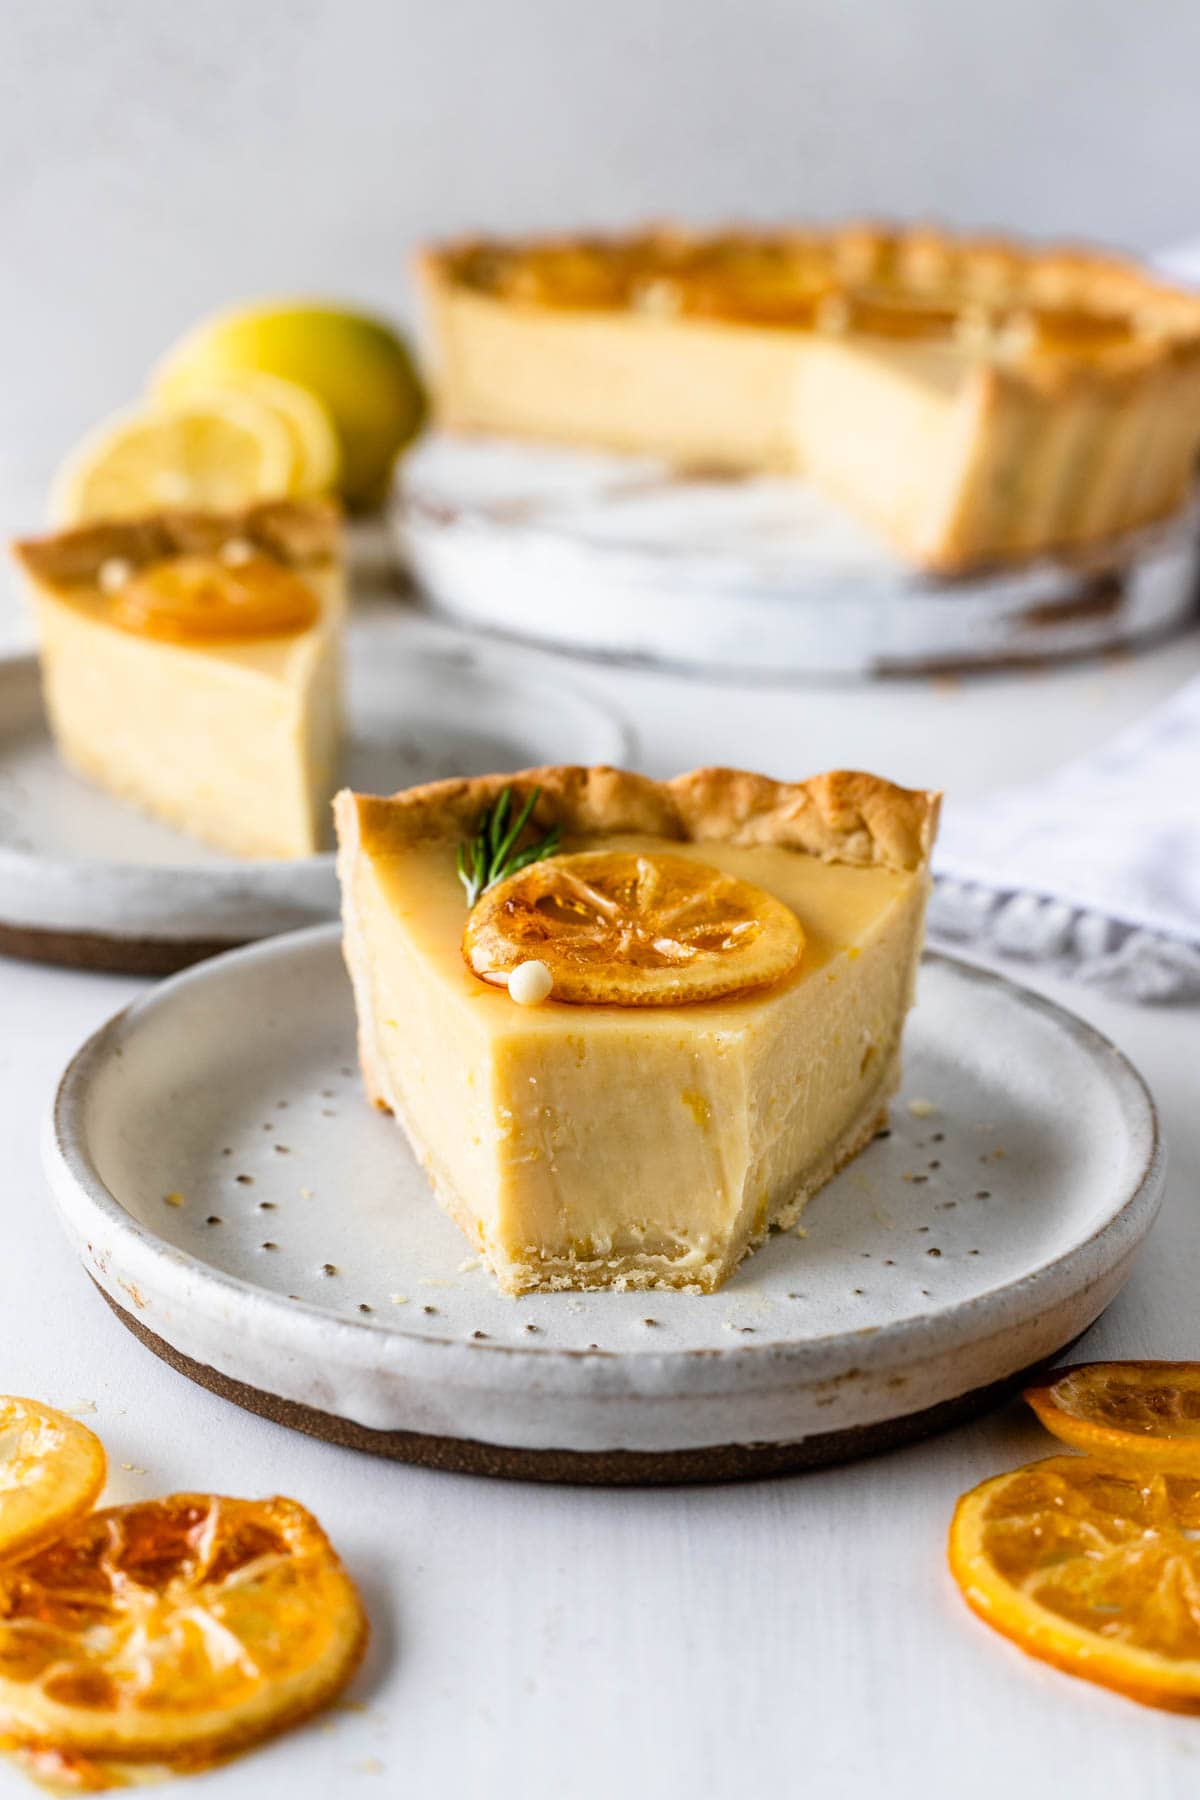 Lemon Pie with Condensed Milk - Pies and Tacos